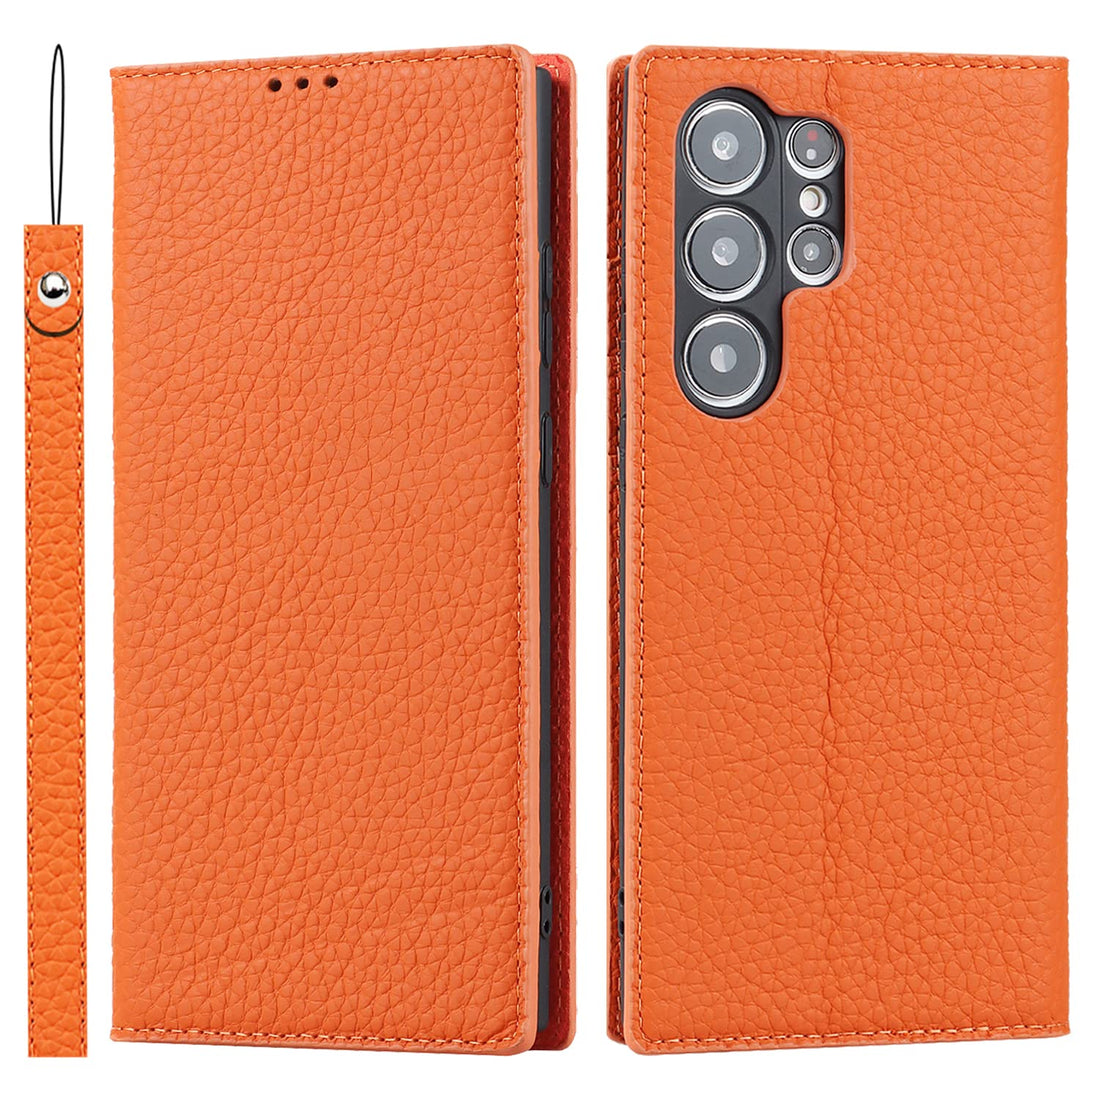 Ｈａｖａｙａ Galaxy S23 Ultra Case with Card Holder-Flap Compatible Cover Shockproof Magnetic Card Storage Thin Wallet Type - Havaya-Orange